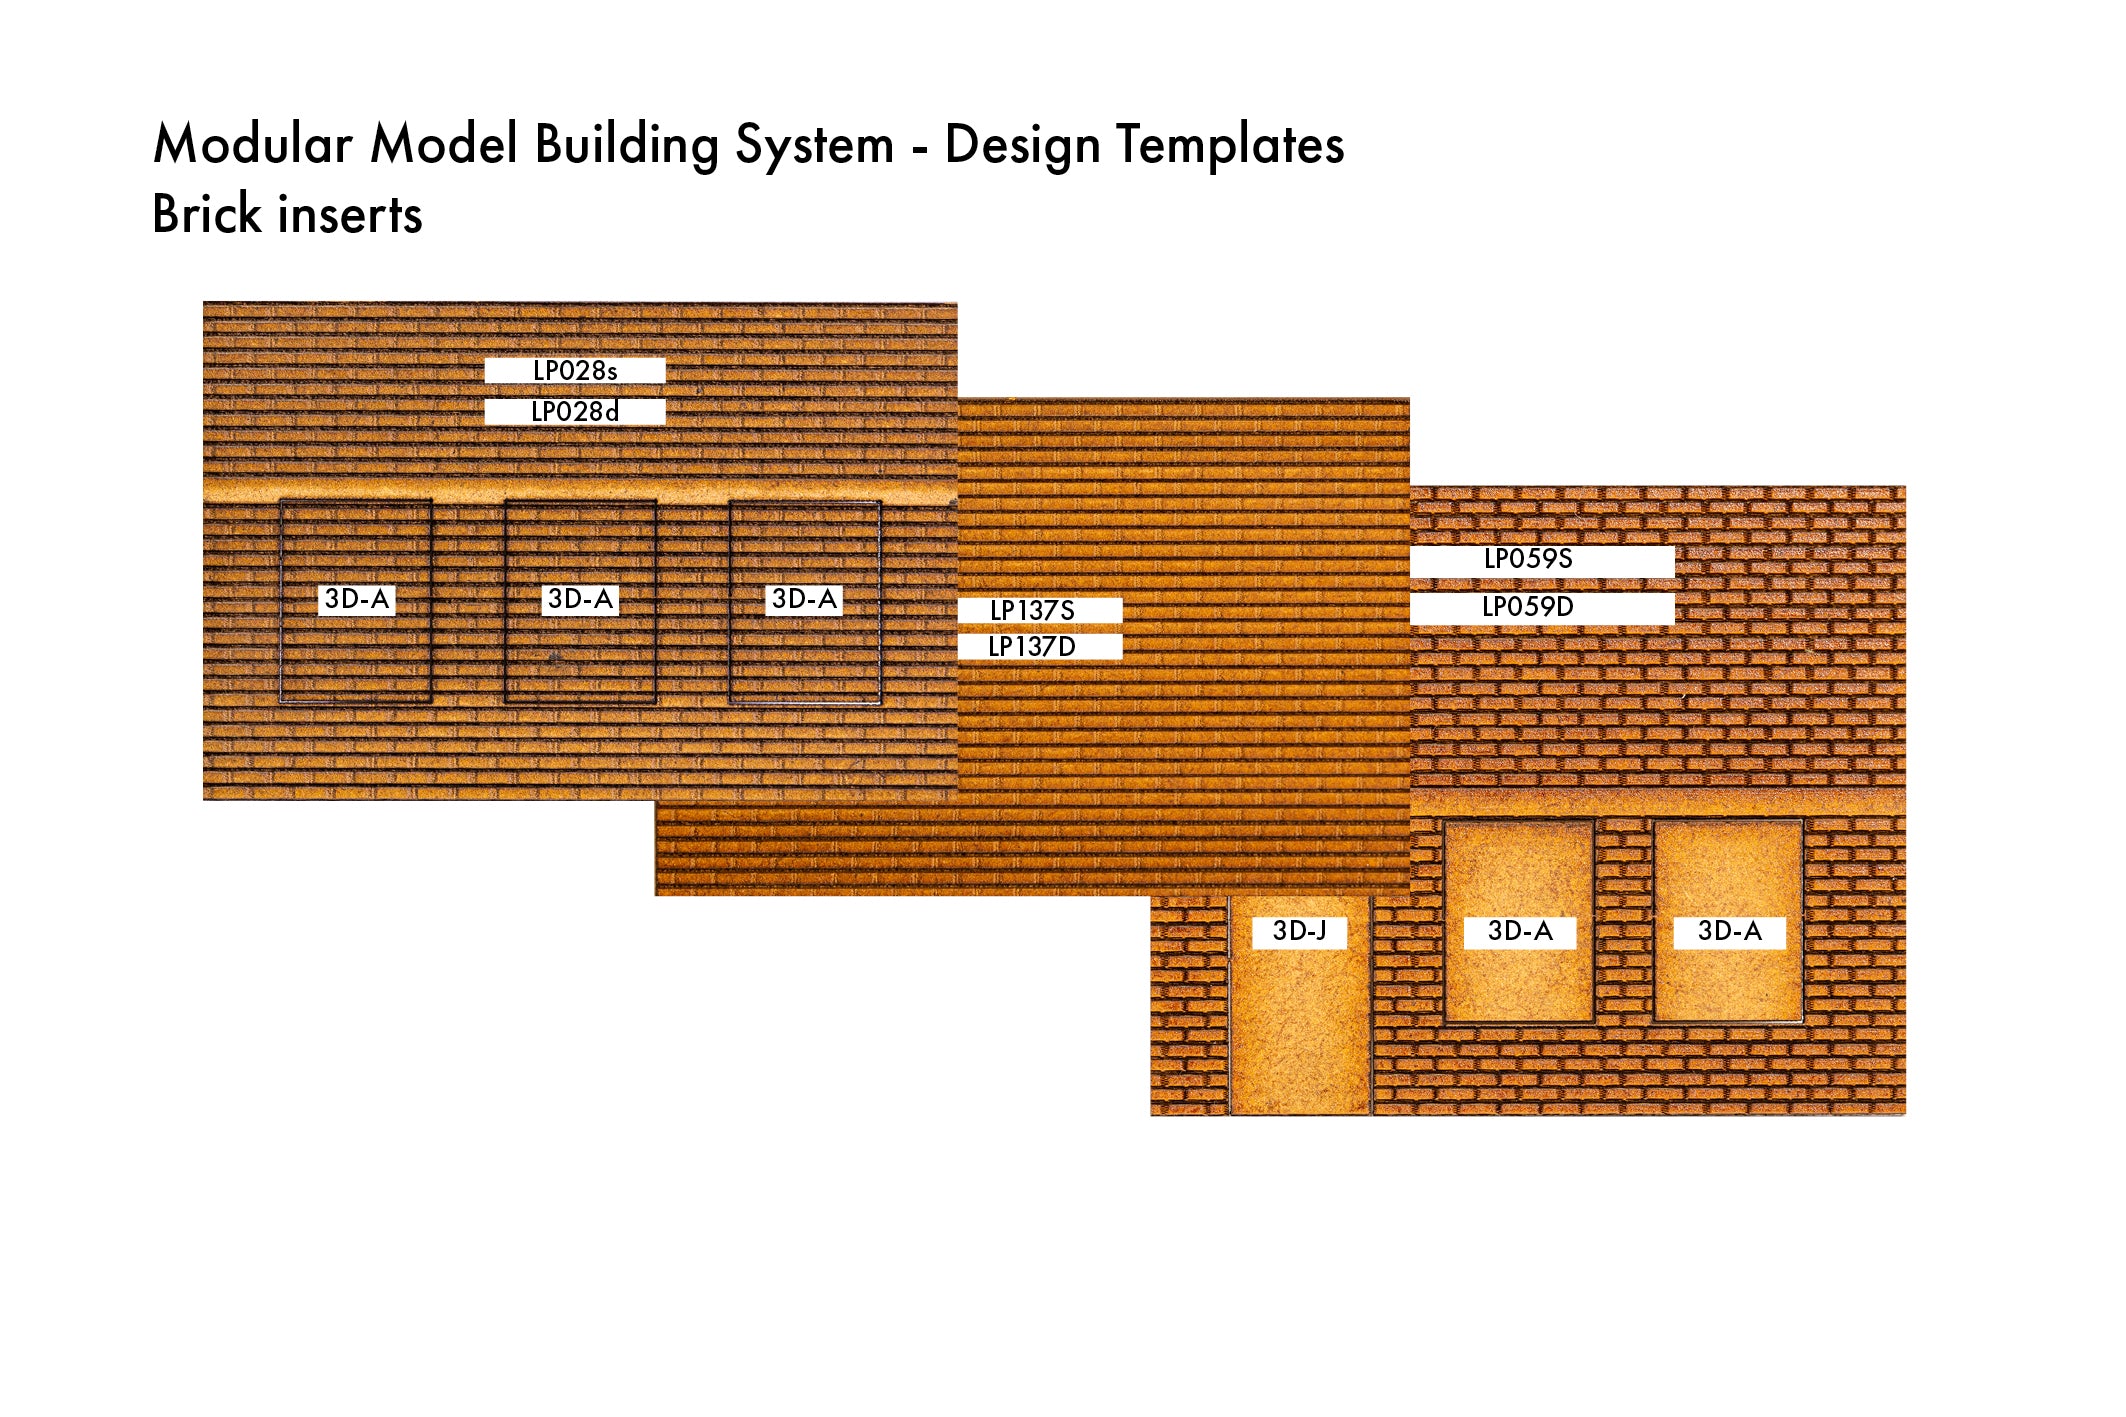 MMBSDT-BPI - Brick panel inserts - MMBS panel template